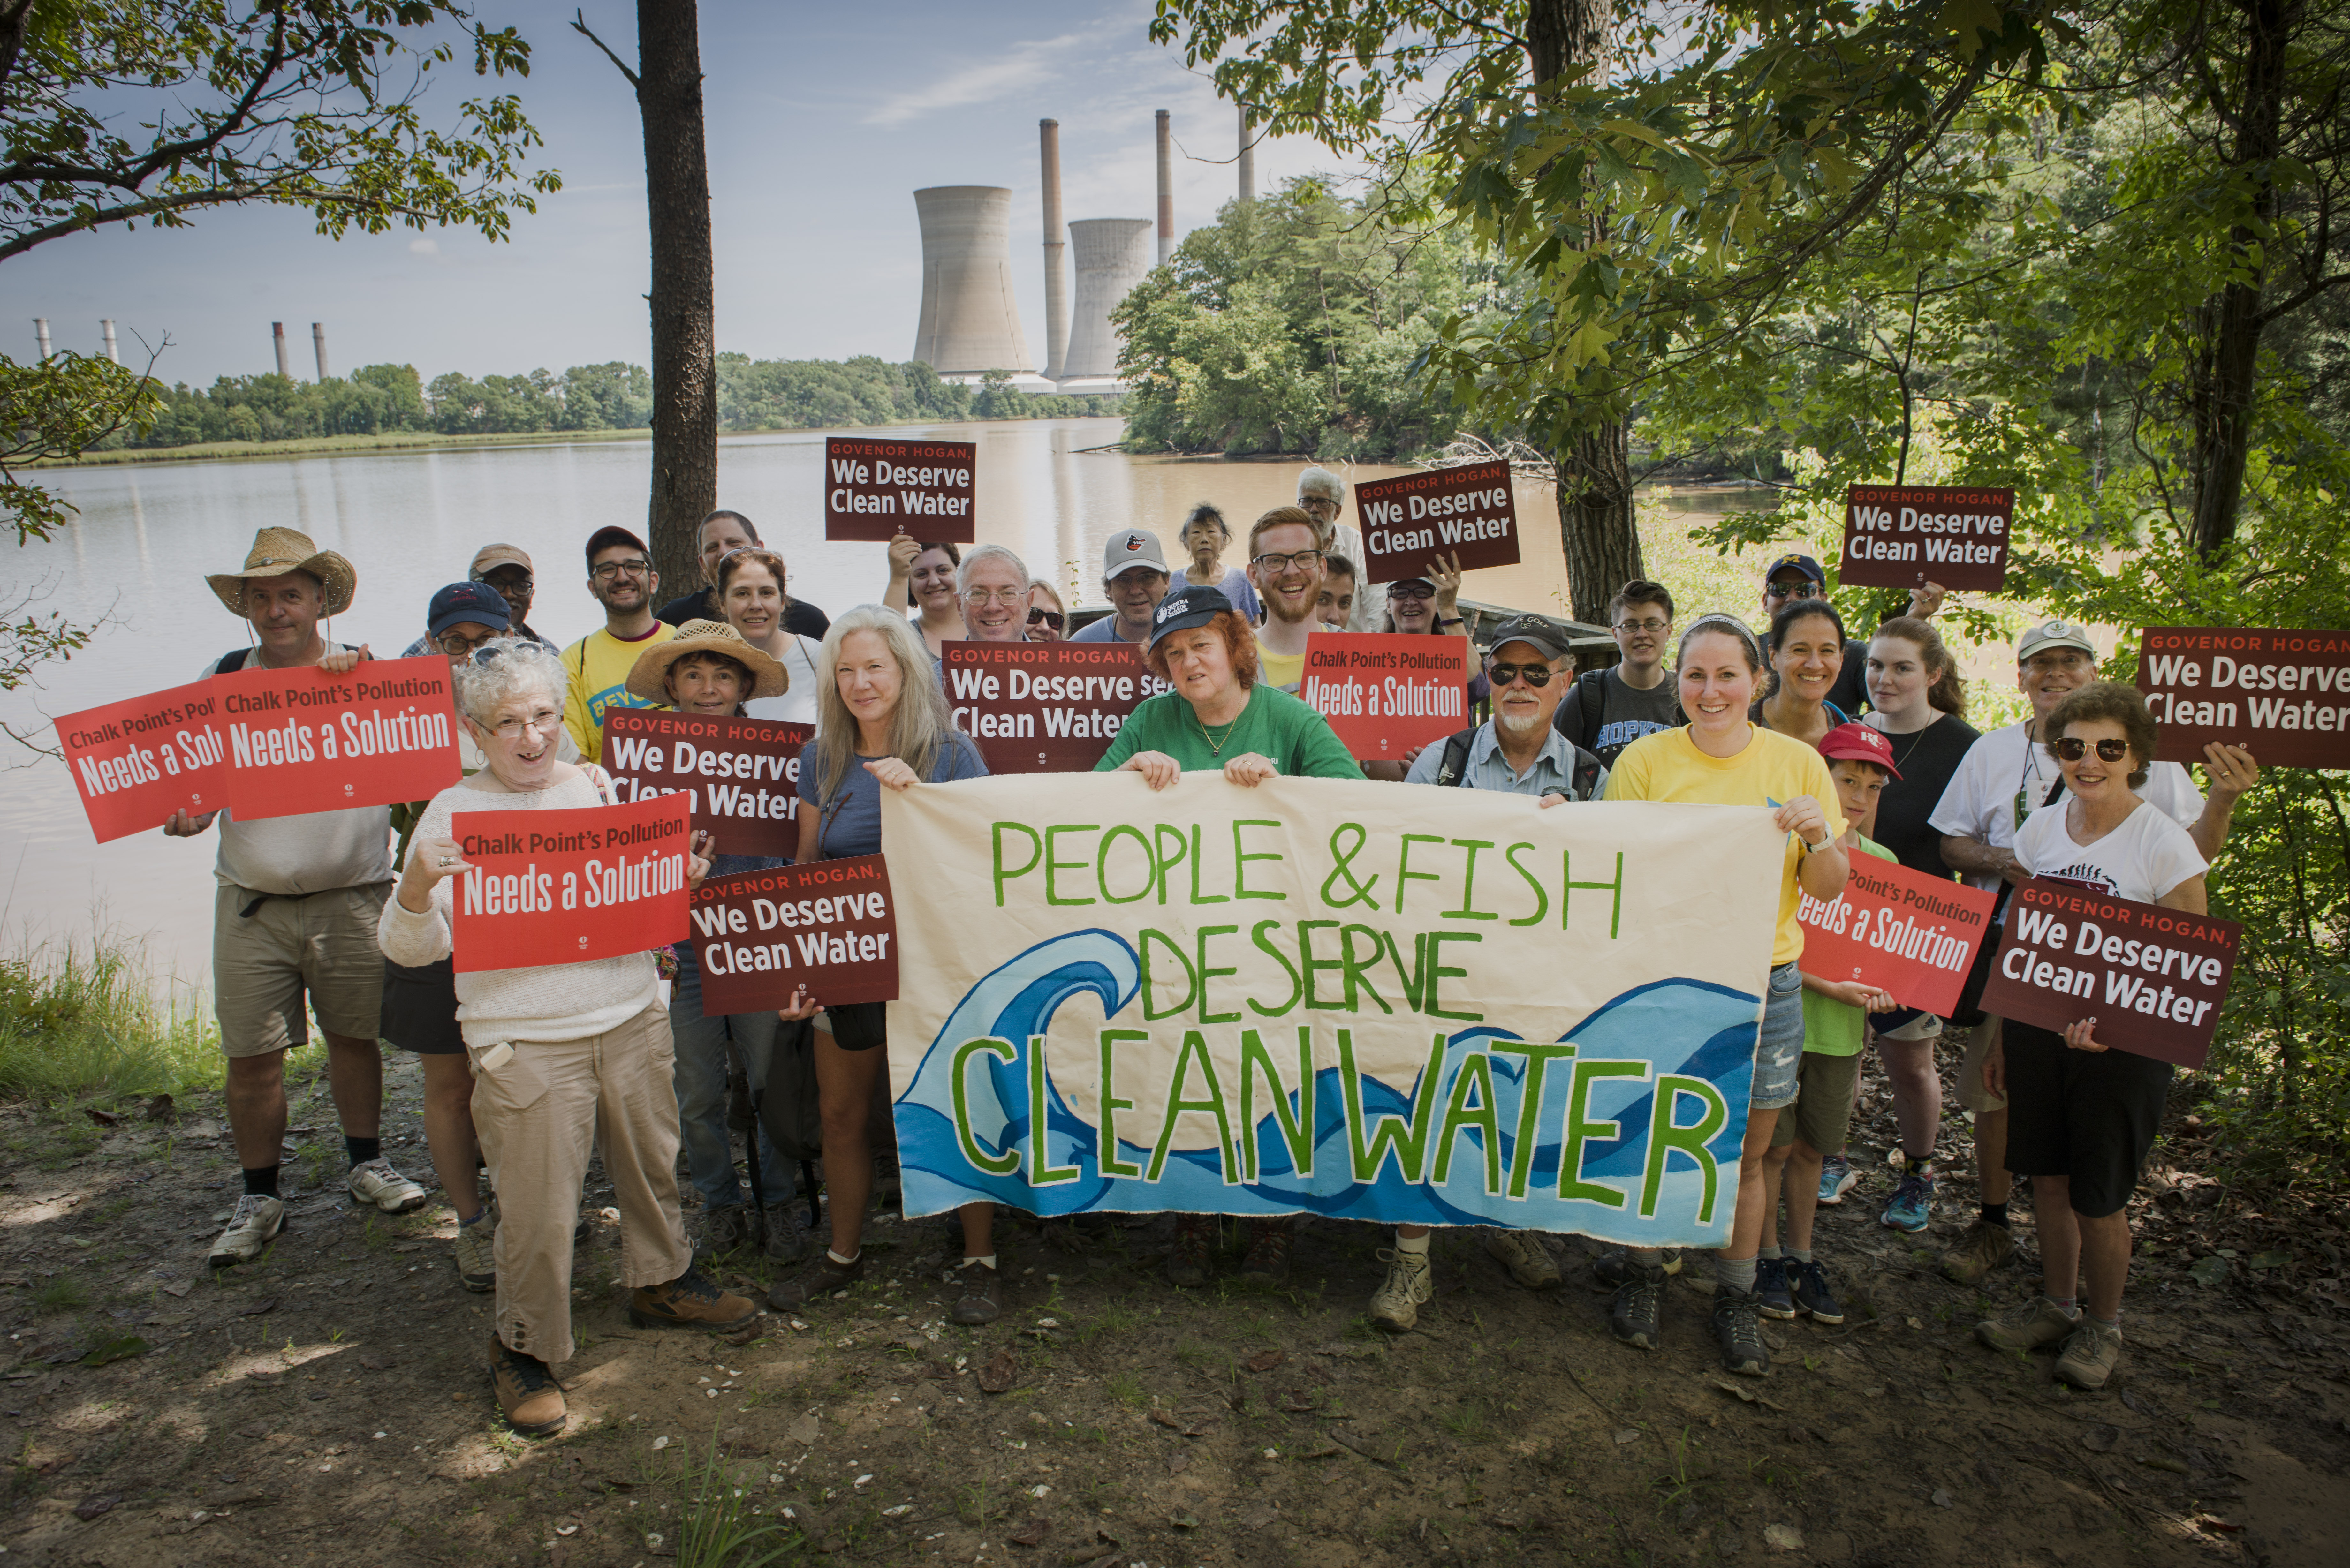 Marylanders gather for a photo in front of the Chalk Point Coal Plant holding a banner that says "People & Fish Deserve Clean Water!"